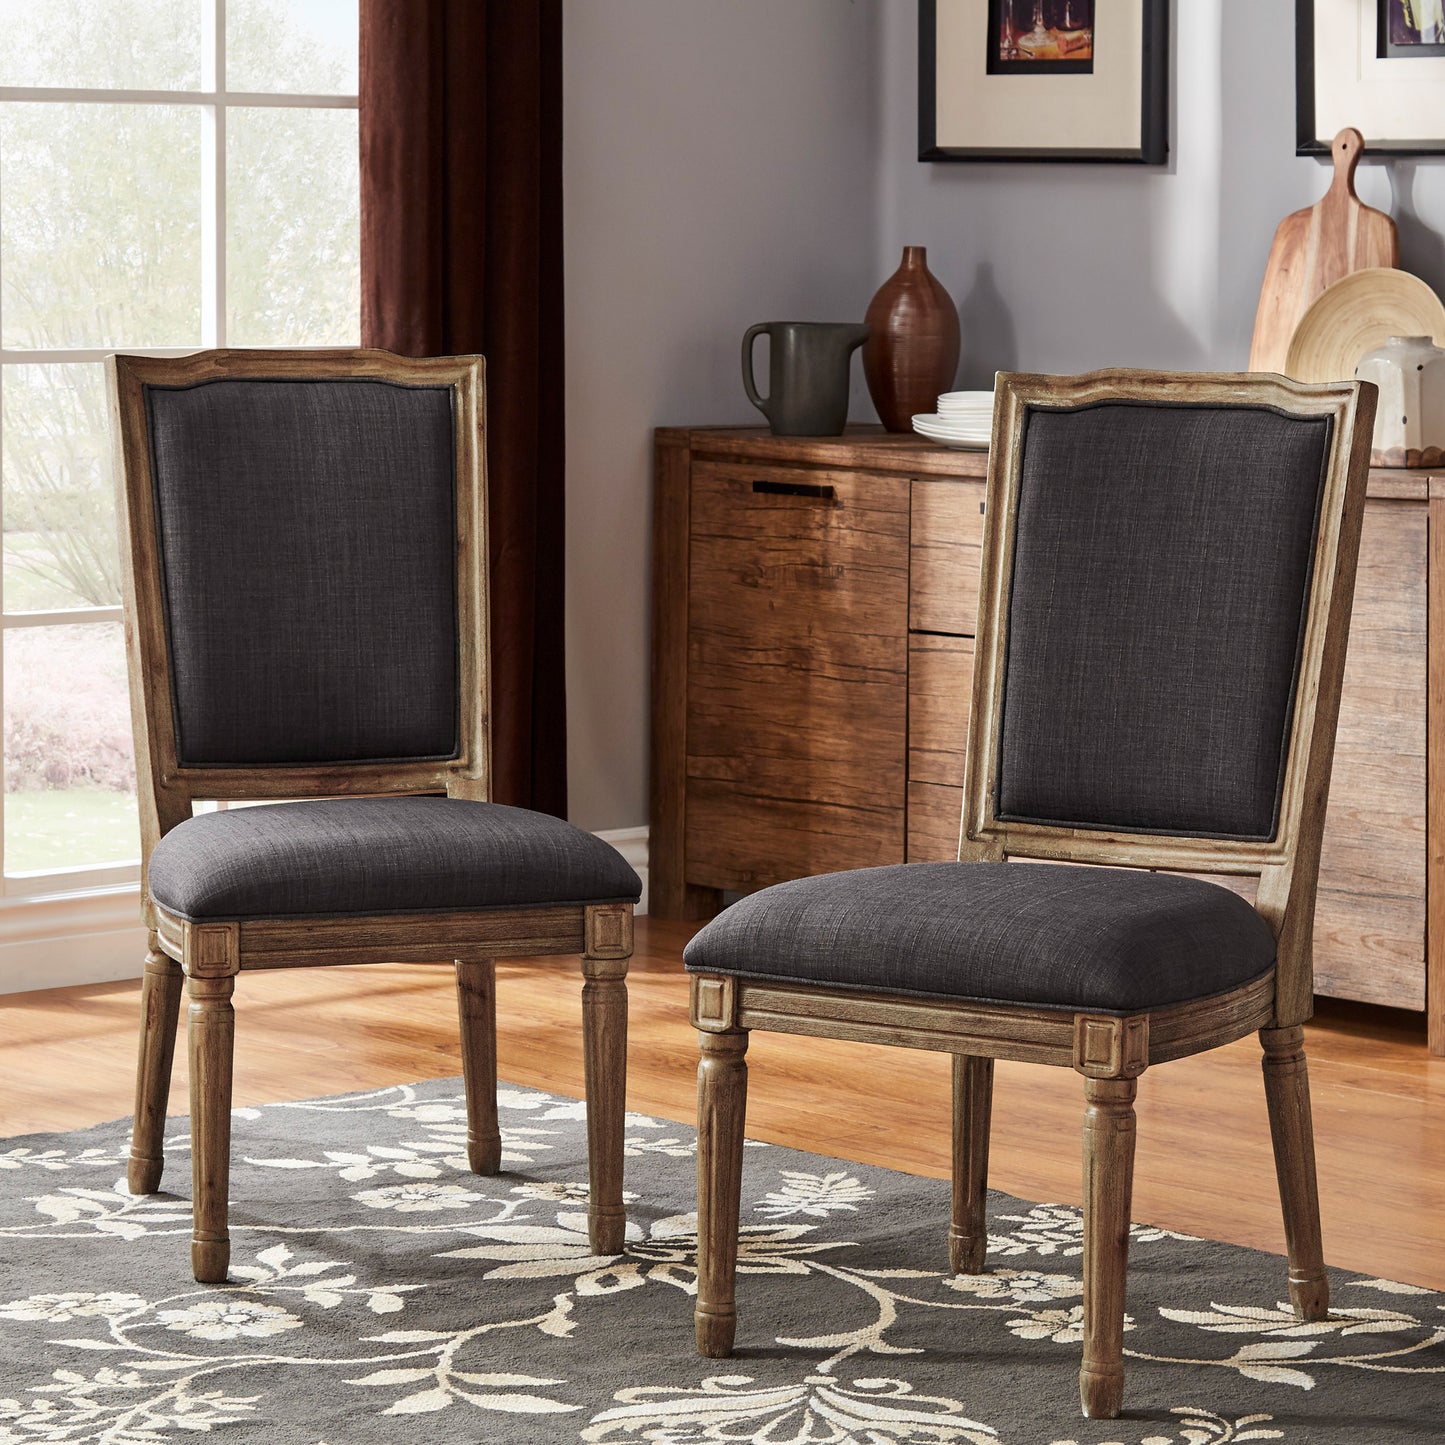 Ornate Linen and Wood Dining Chairs (Set of 2) - Dark Gray Linen, Brown Finish